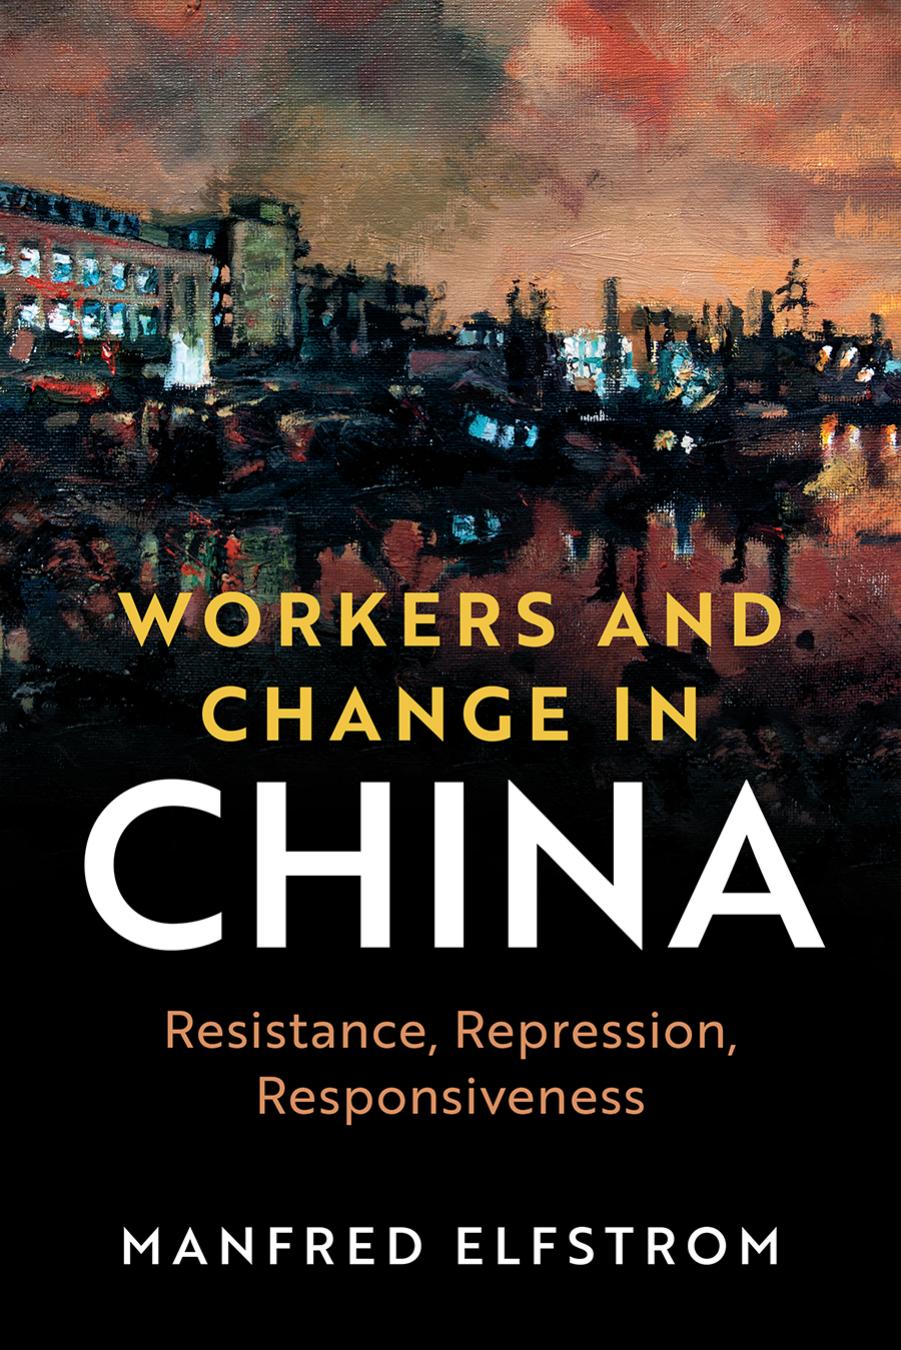 (eBook PDF)Workers and Change in China: Resistance, Repression, Responsiveness by Manfred Elfstrom